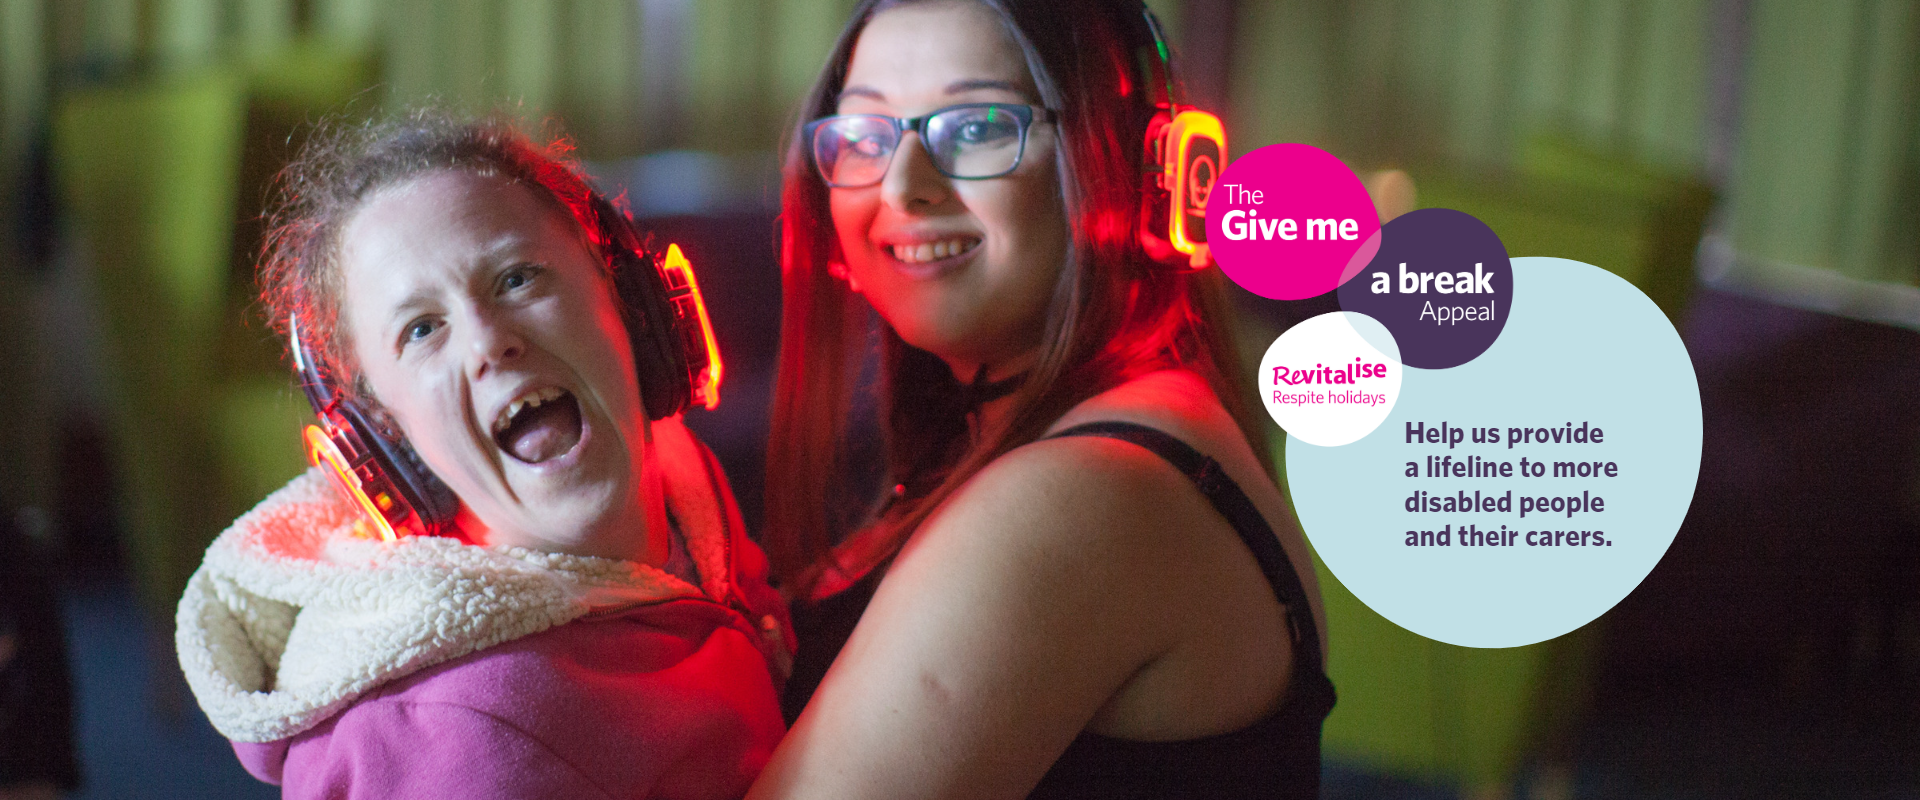 A disabled young woman dancing with an able-bodied young woman at a silent disco, both wearing headphones